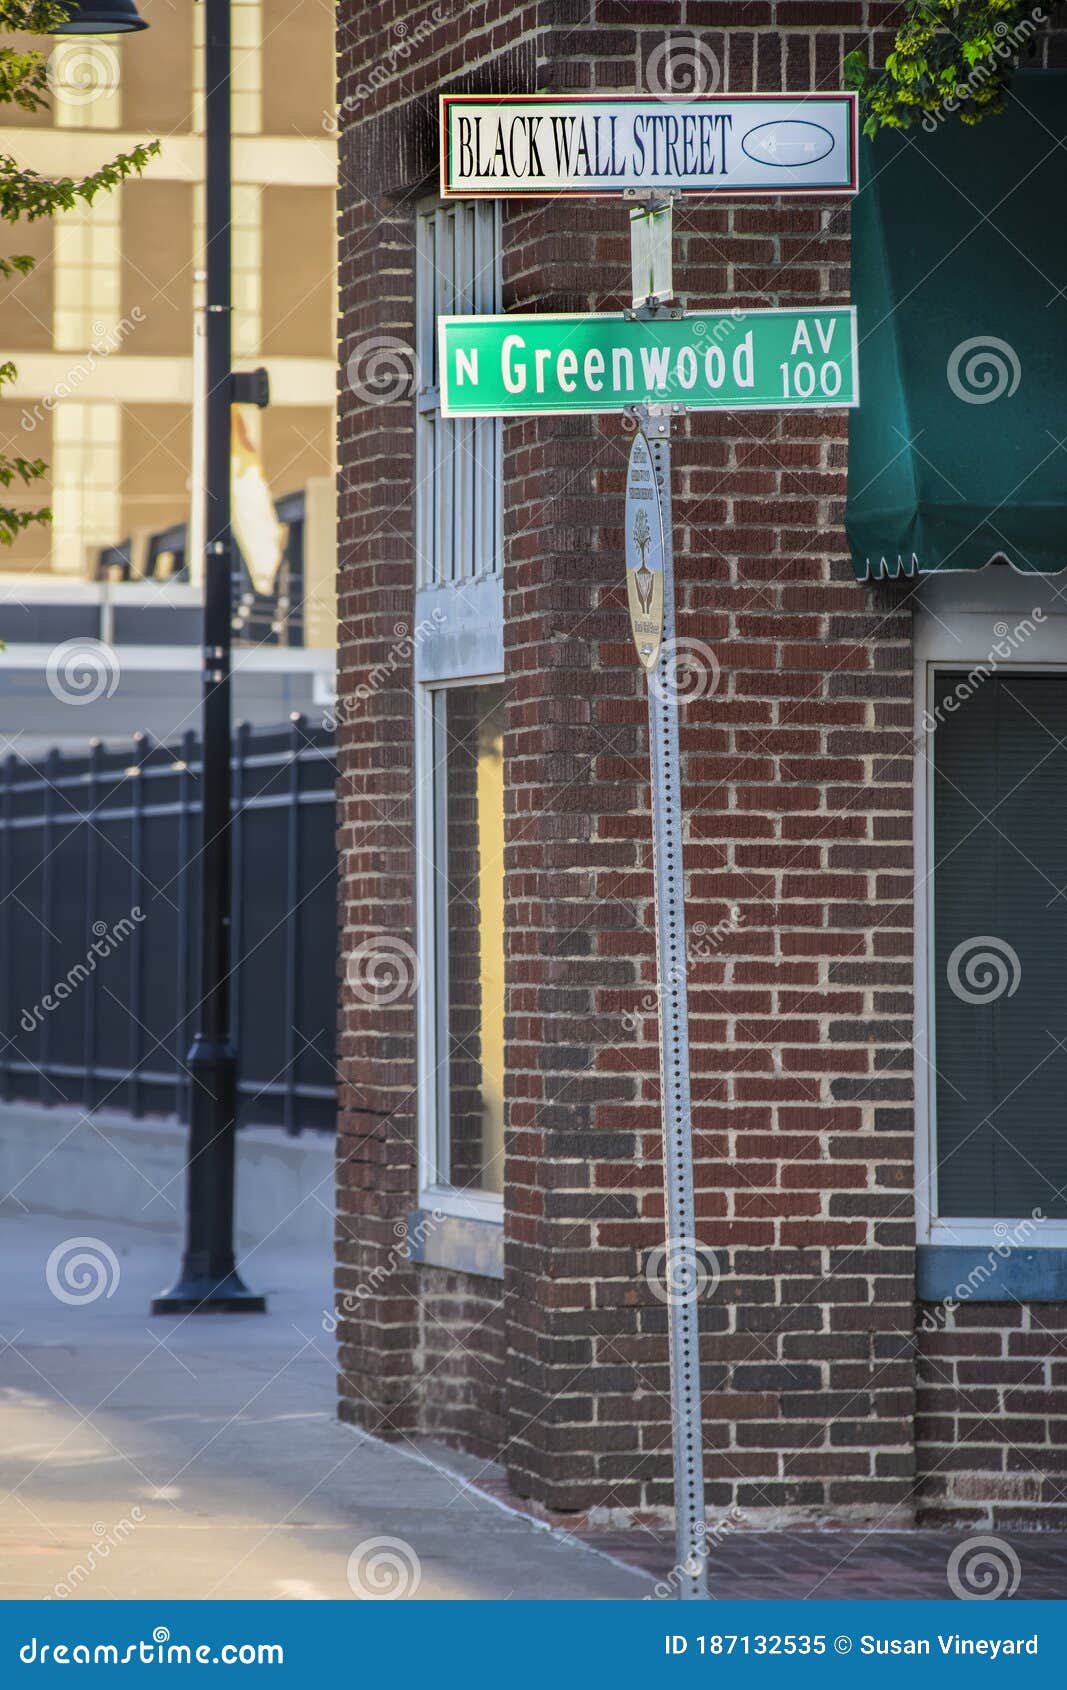 tulsa usa street sign that reads black wall street and greenwood av against brick building-site of historic tulsa race